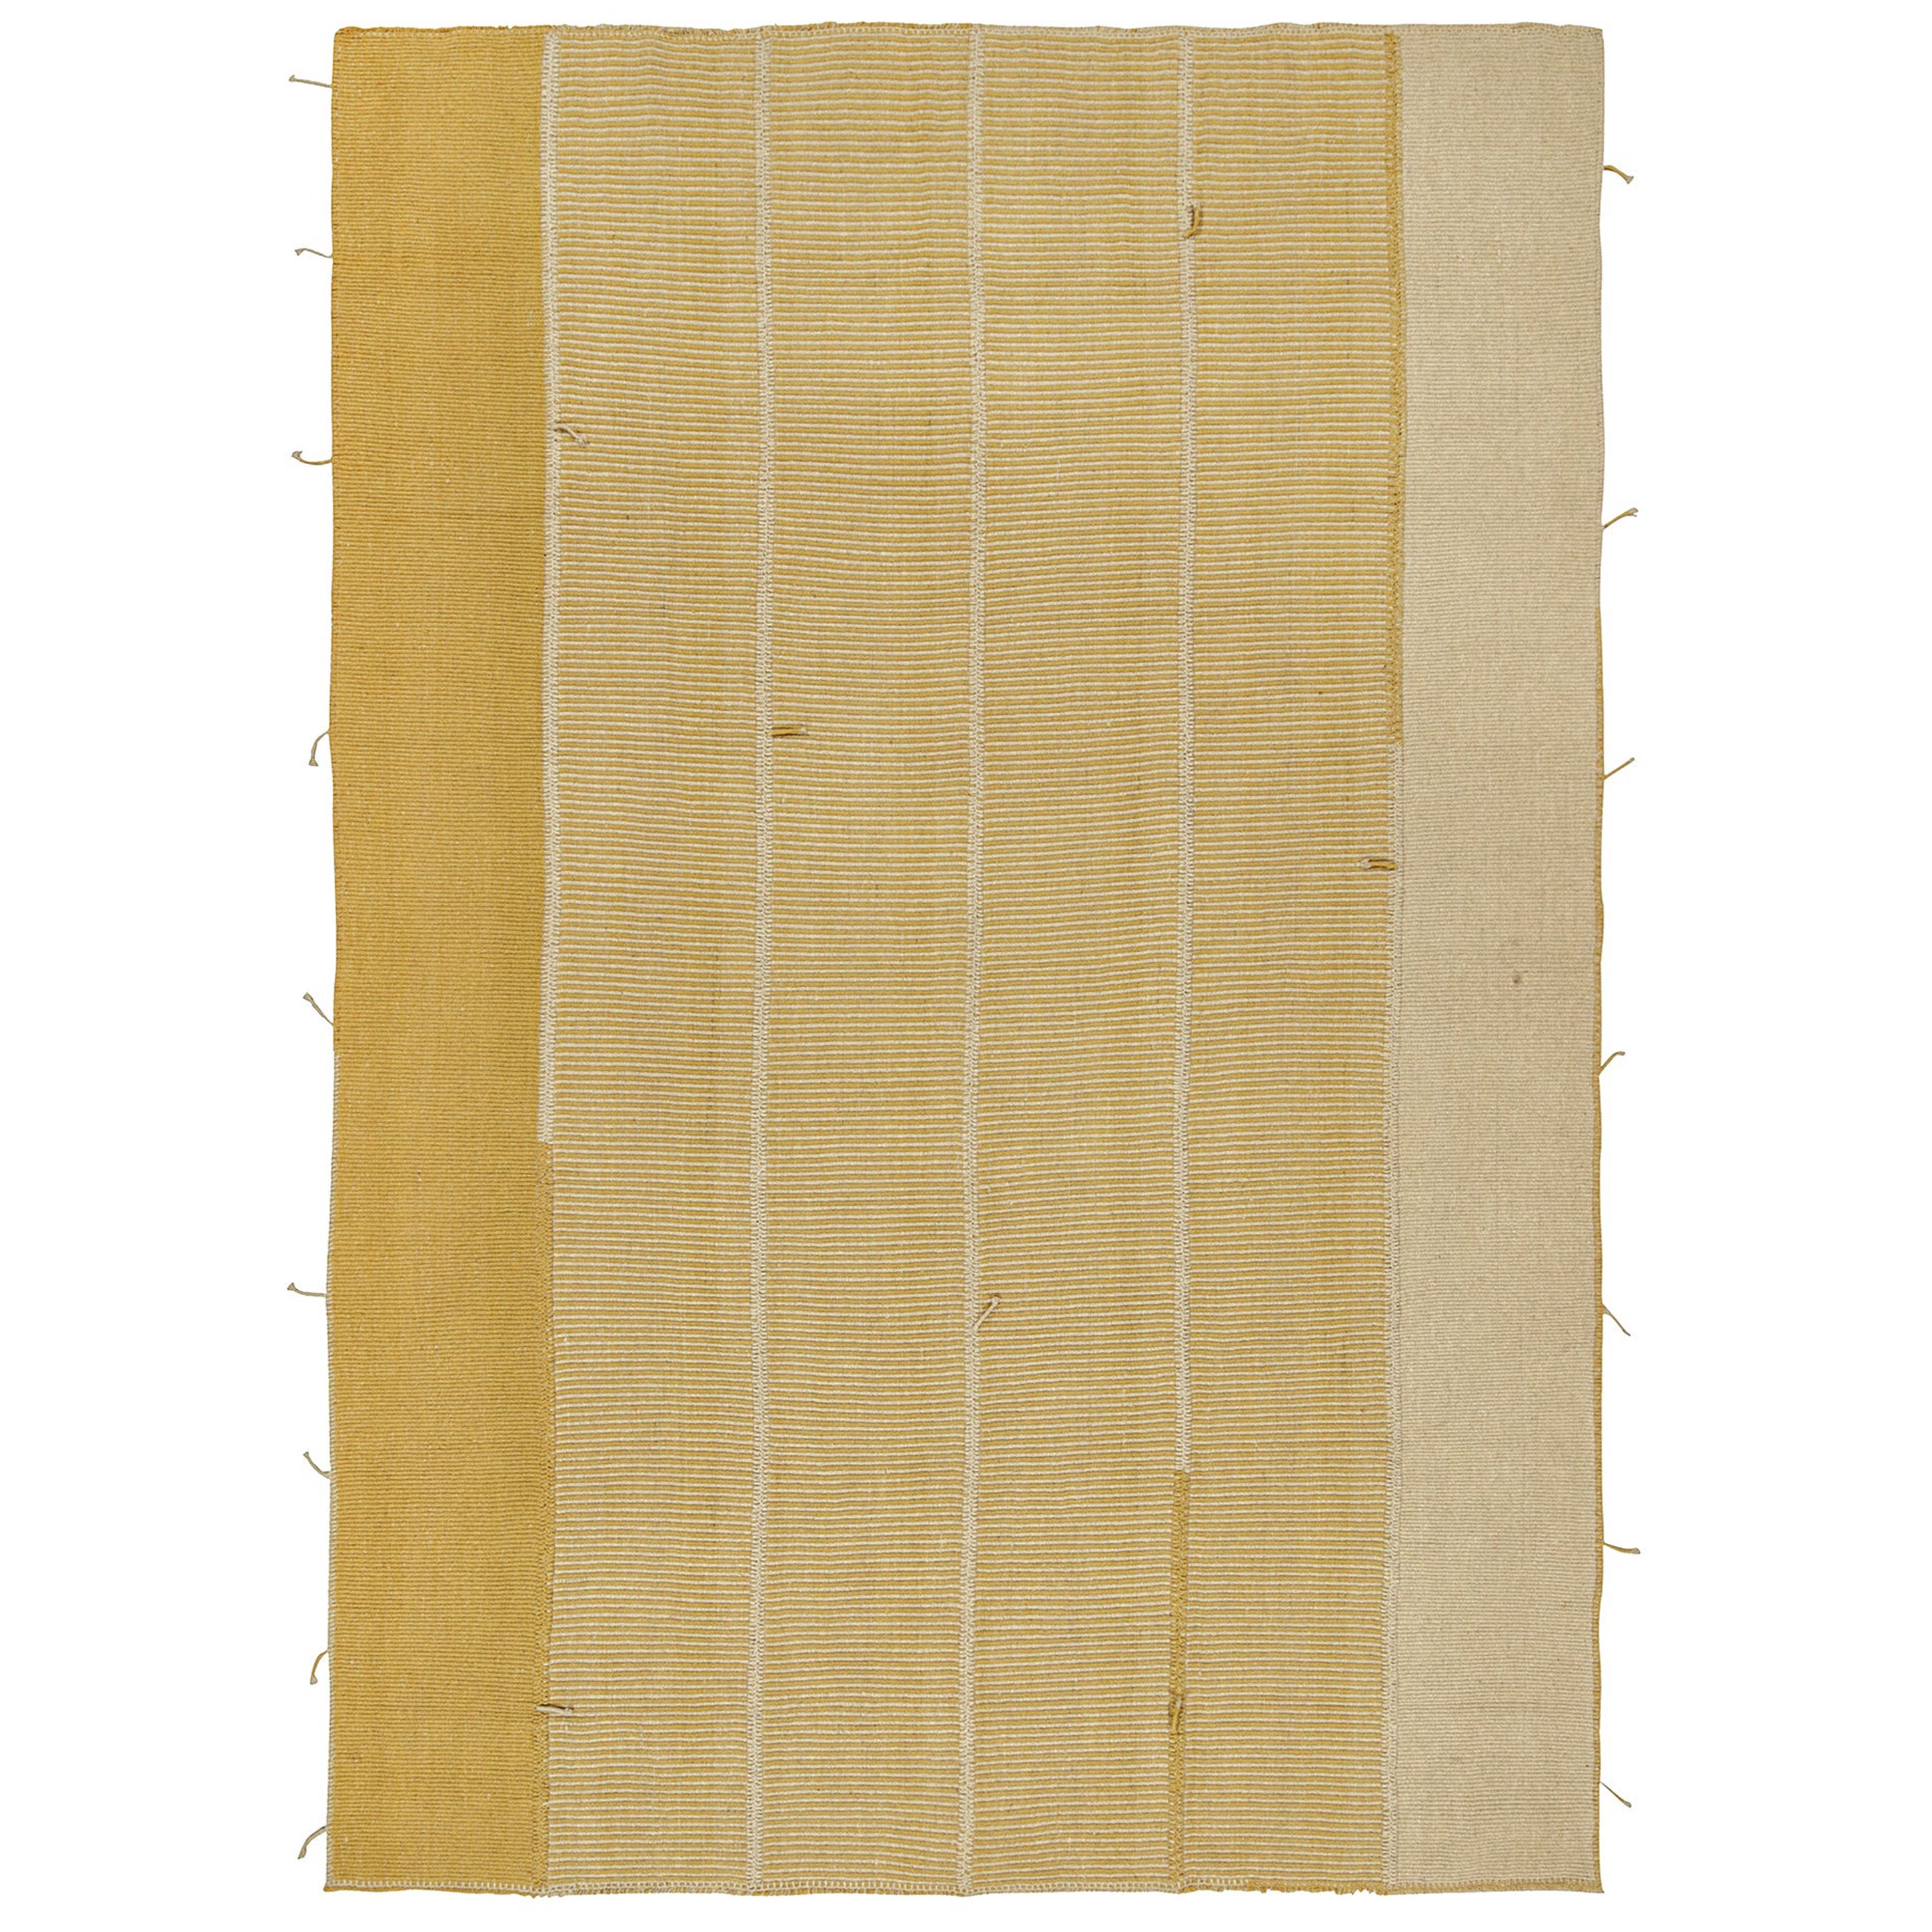 Rug & Kilim’s Contemporary Kilim Rug in Beige and Mustard Stripes